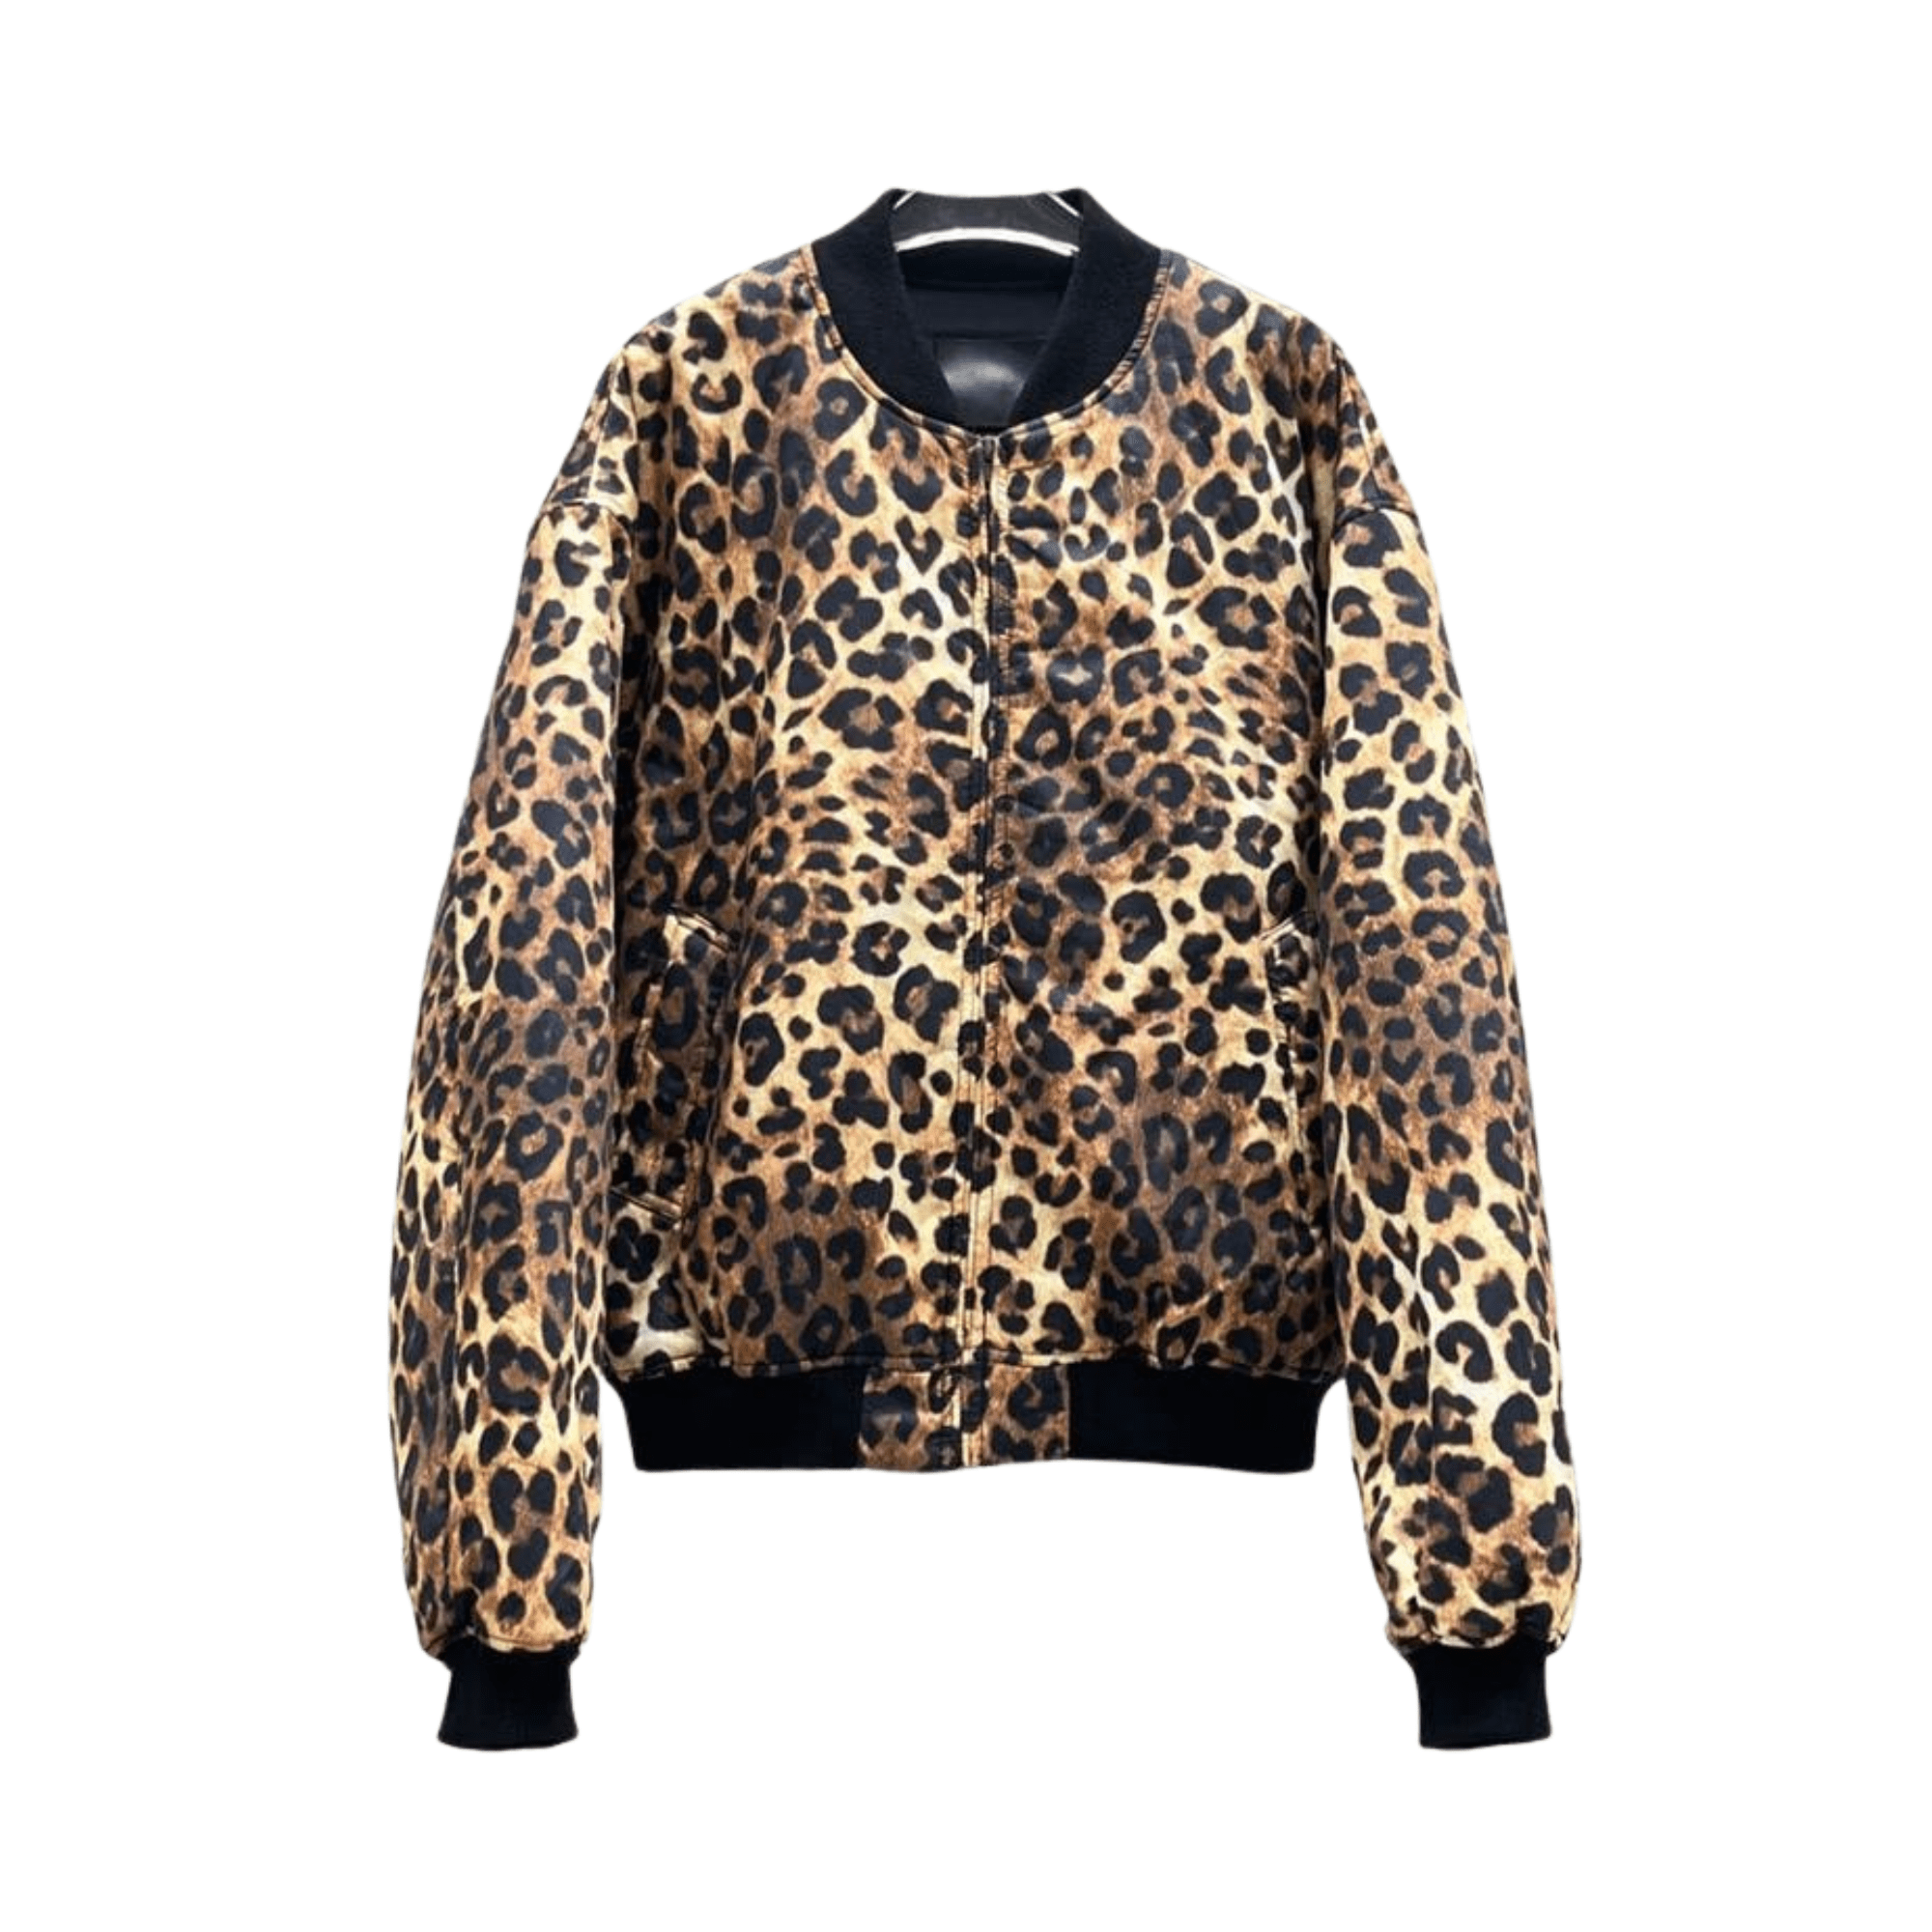 Ribbed Cuff and Collar Leopard Jacket - Kelly Obi New York